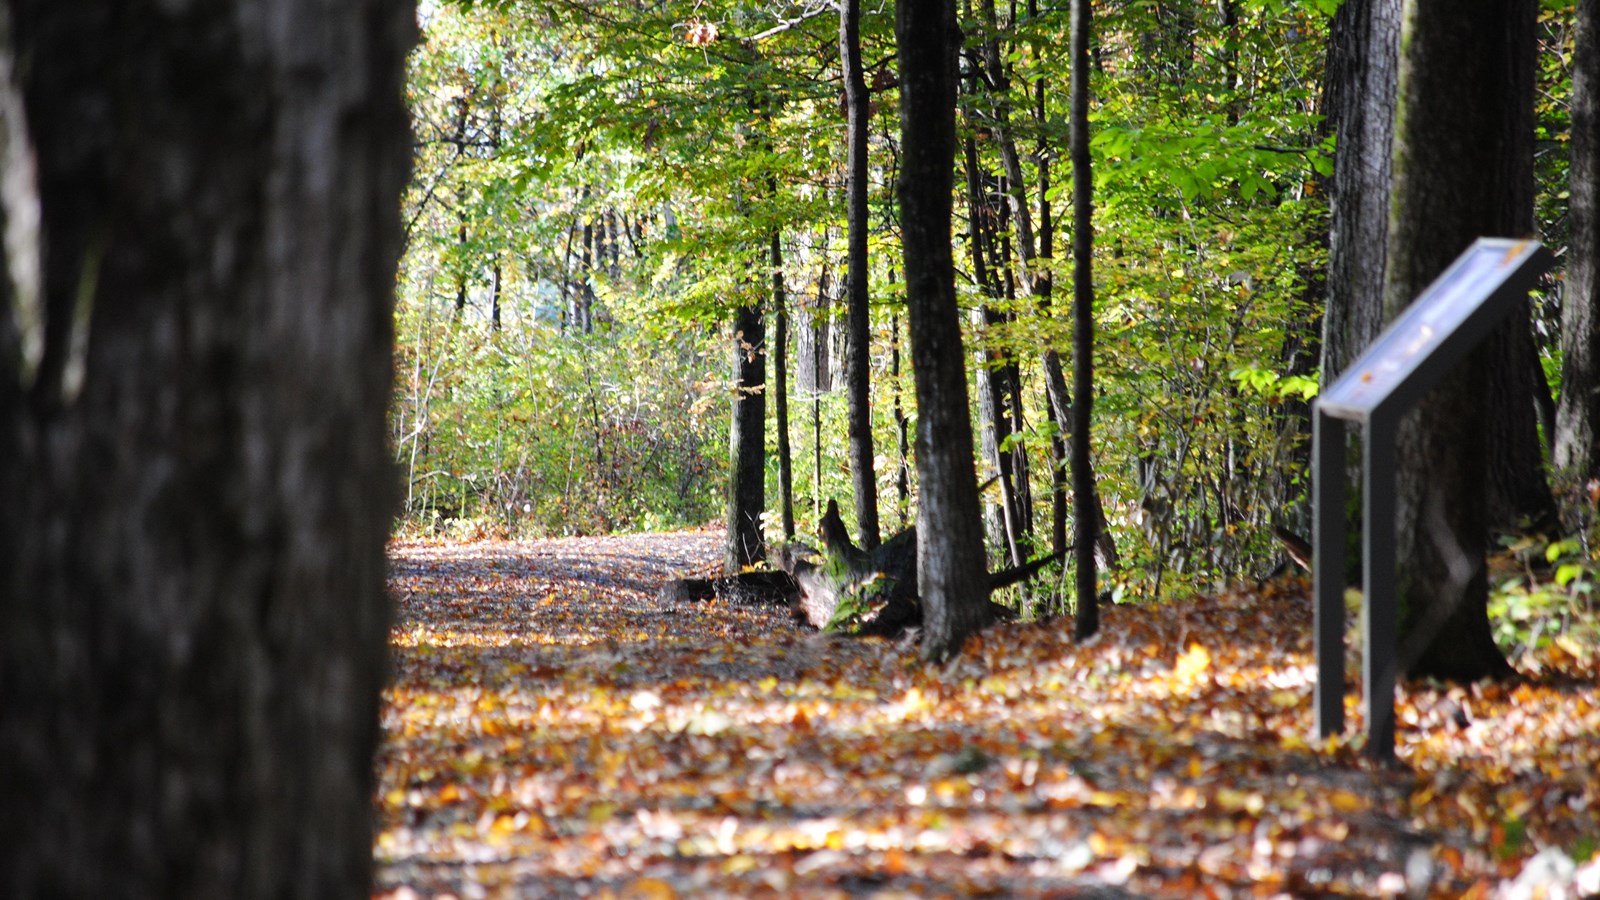 view of trail in the woods covered in fallen leaves with a wayside sign on the right